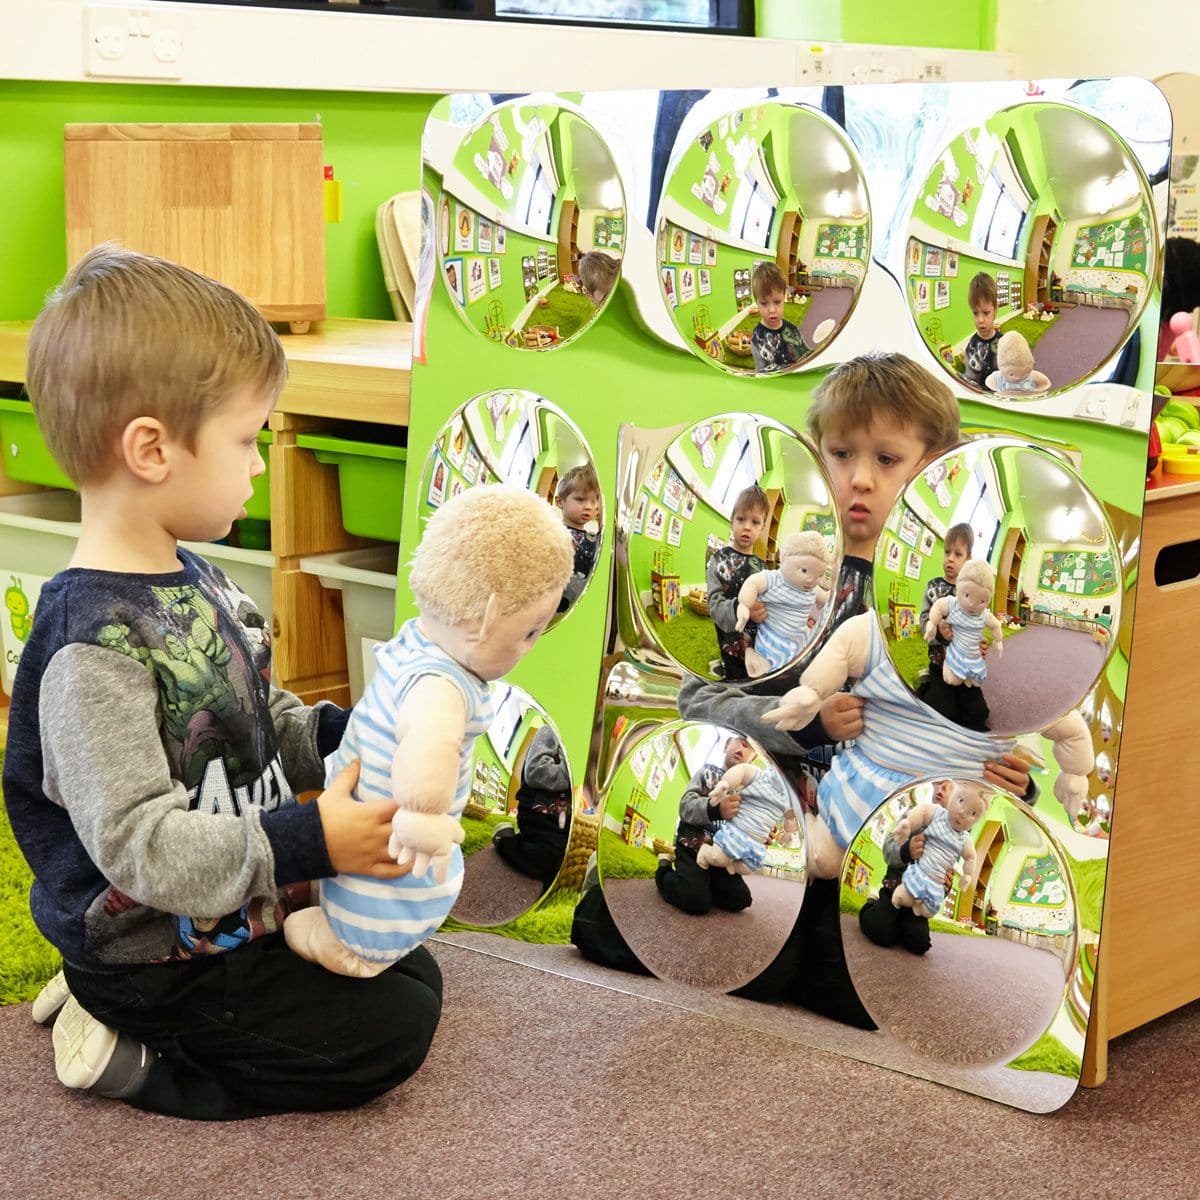 Giant 9 Domed Acrylic Mirror Panel 780mm, The TickiT Giant 9-Domed Acrylic Mirror Panel is made from scratch resistant acrylic these mirror panels are safe and ideal for any classroom or nursery setting. Children are drawn to the TickiT Giant 9-Domed Acrylic Mirror Panel for the observation of themselves and objects. The Giant 9 Domed Acrylic Mirror is a convex mirror domes which provide a distorted, fun and interesting view of the world for children to explore. The TickiT Giant 9-Domed Acrylic Mirror Panel